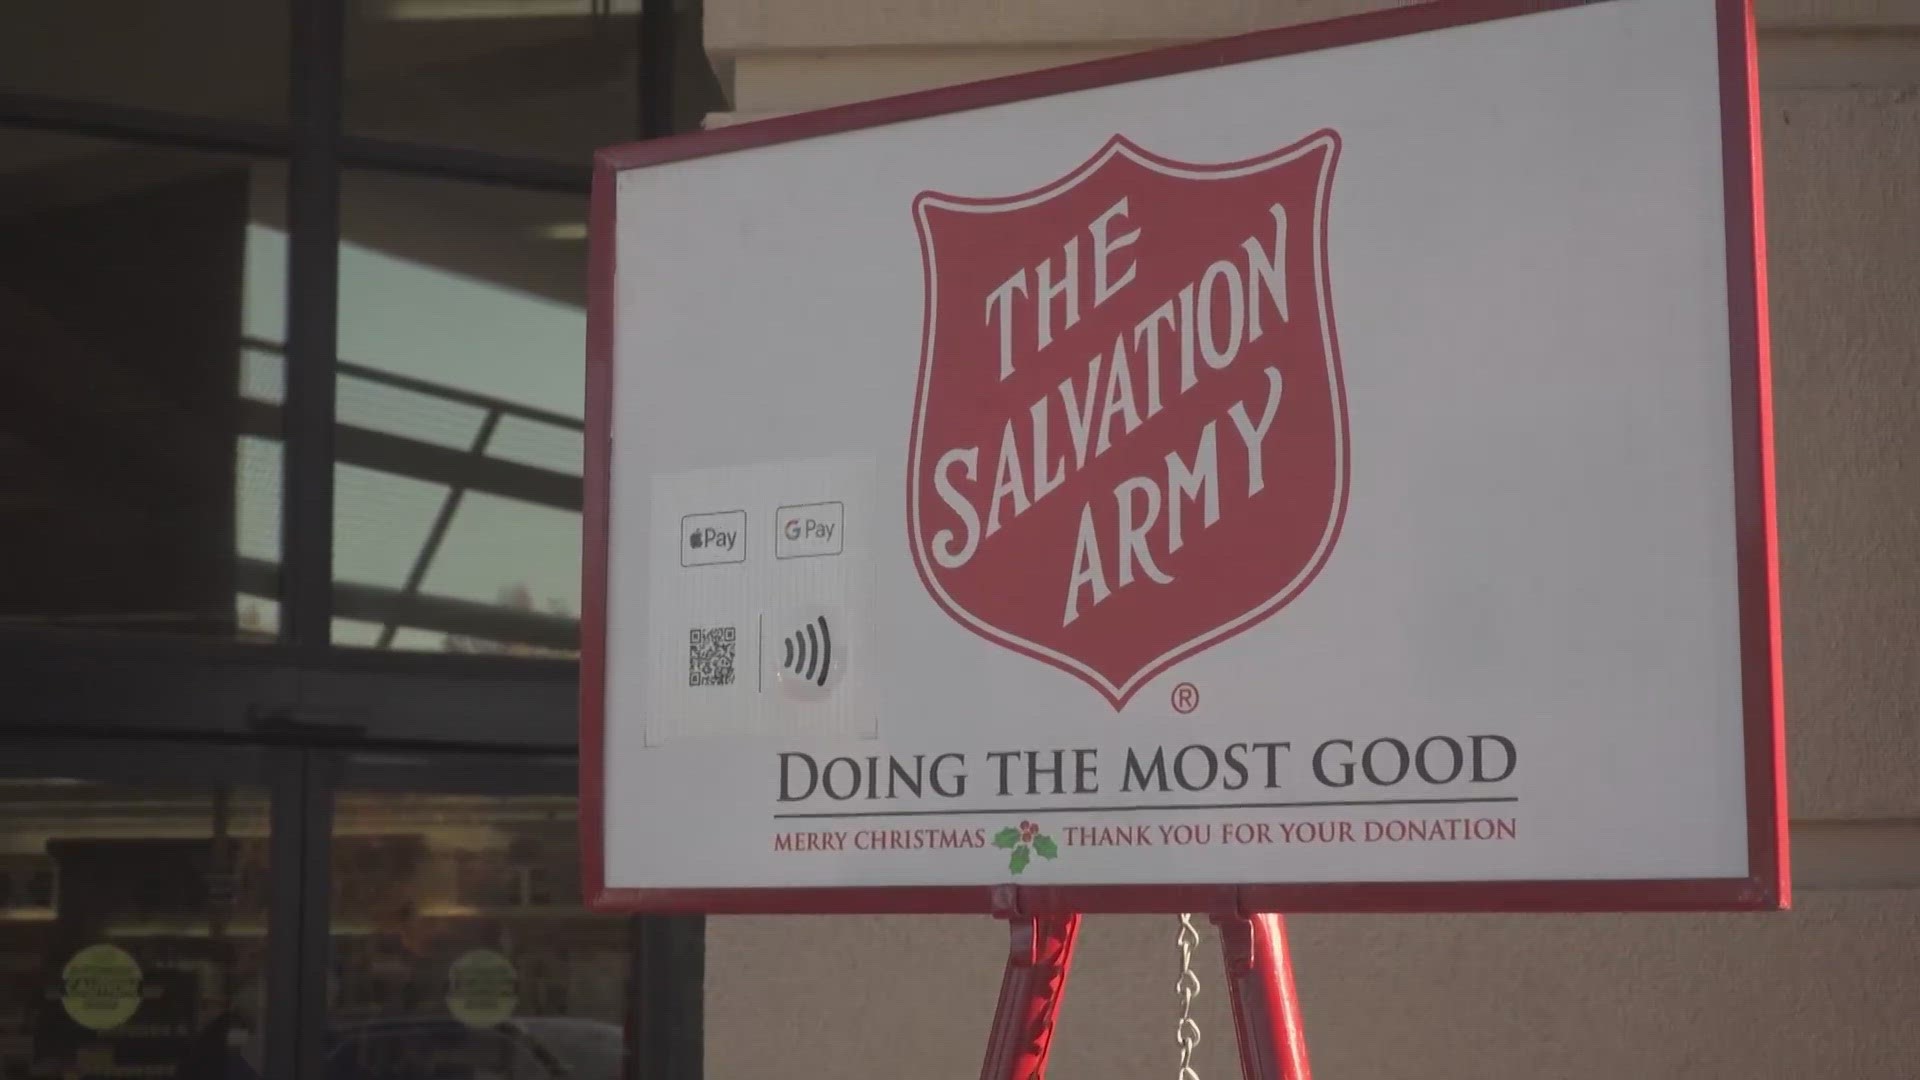 The Salvation Army says there's been a drop of $1.4 million in the last year, resulting in fewer people getting help.